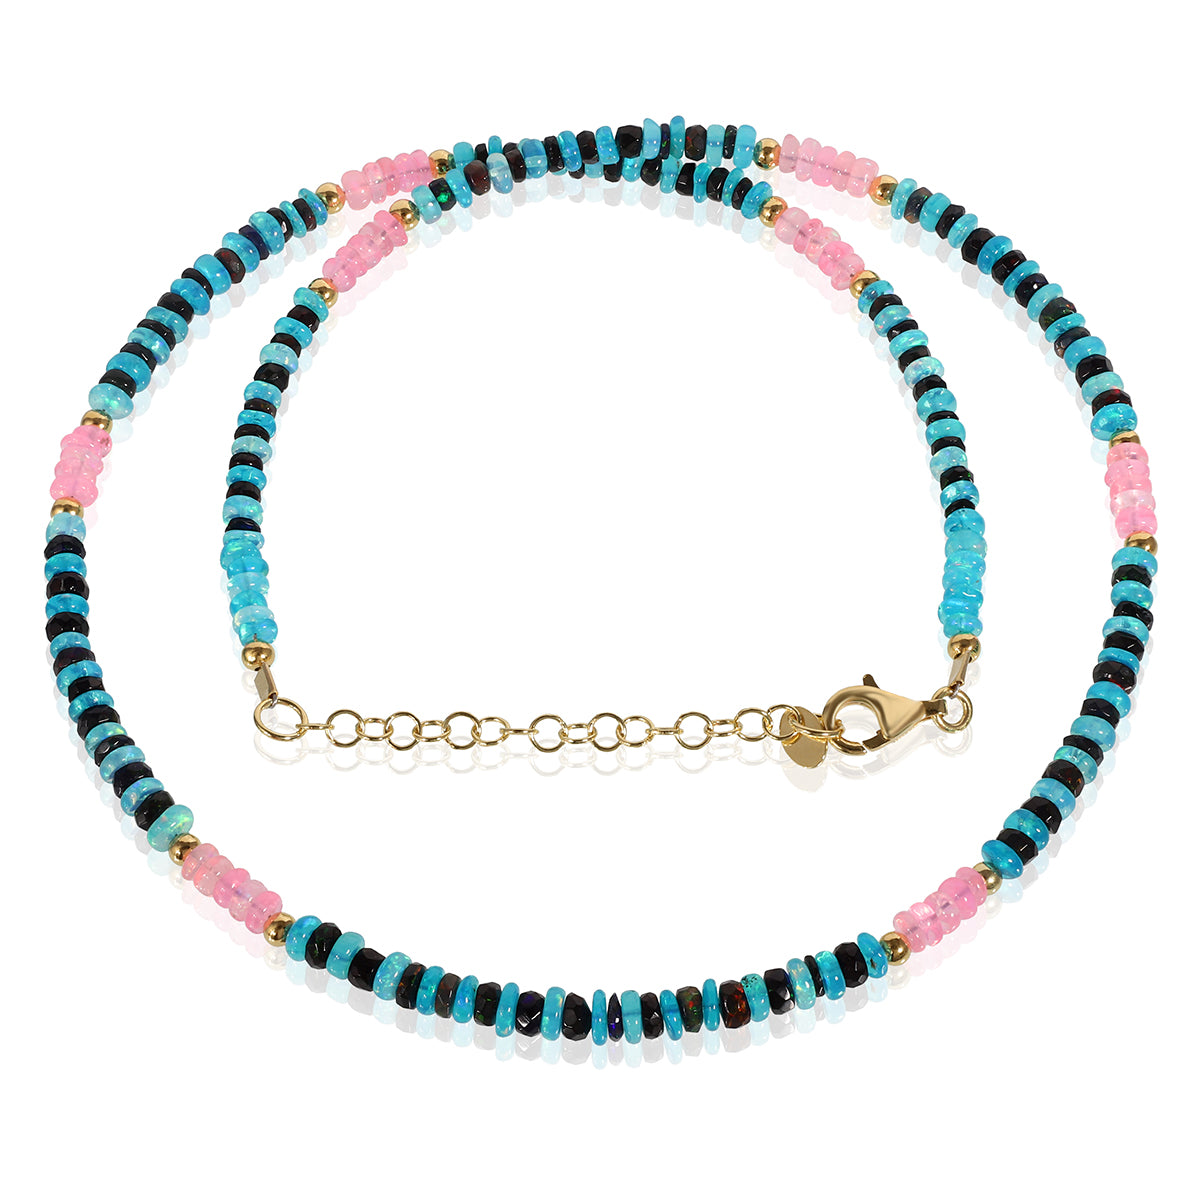 Blue, Black and Pink Ethiopian Opal Silver Necklace